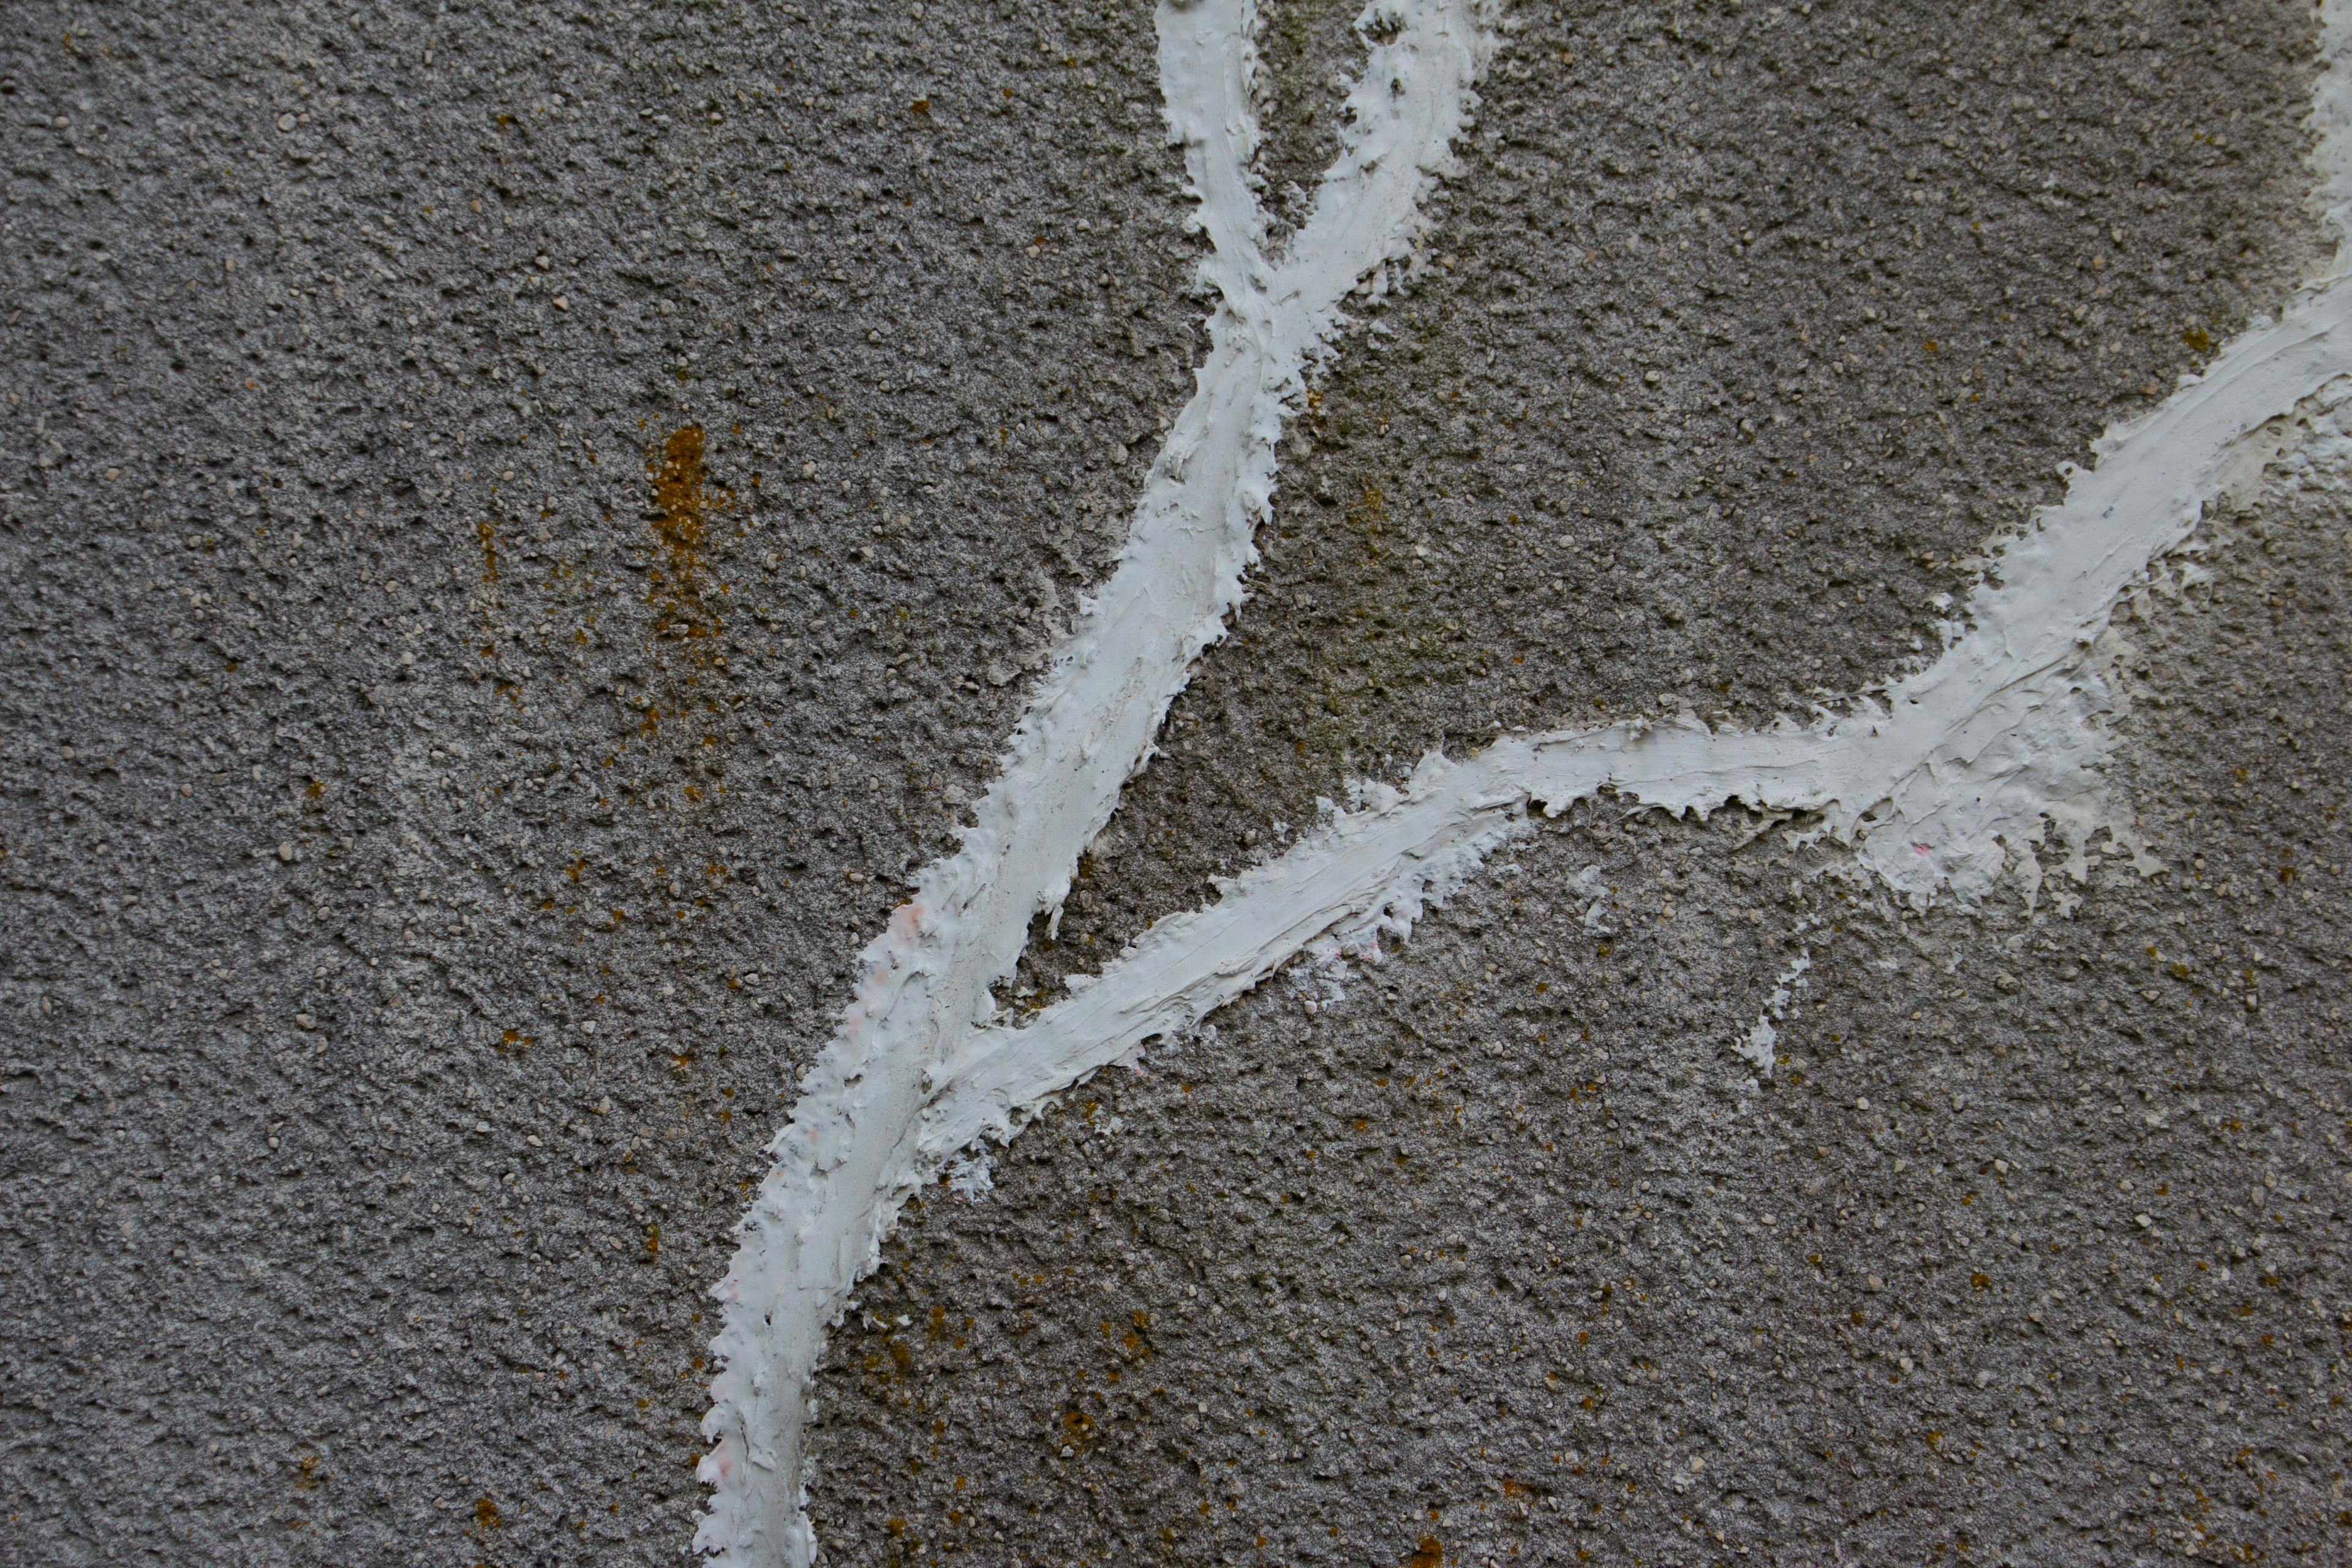 Concrete wall with crack repaired with white concrete patching putty | Image Credit: © Robert Knapp - stock.adobe.com